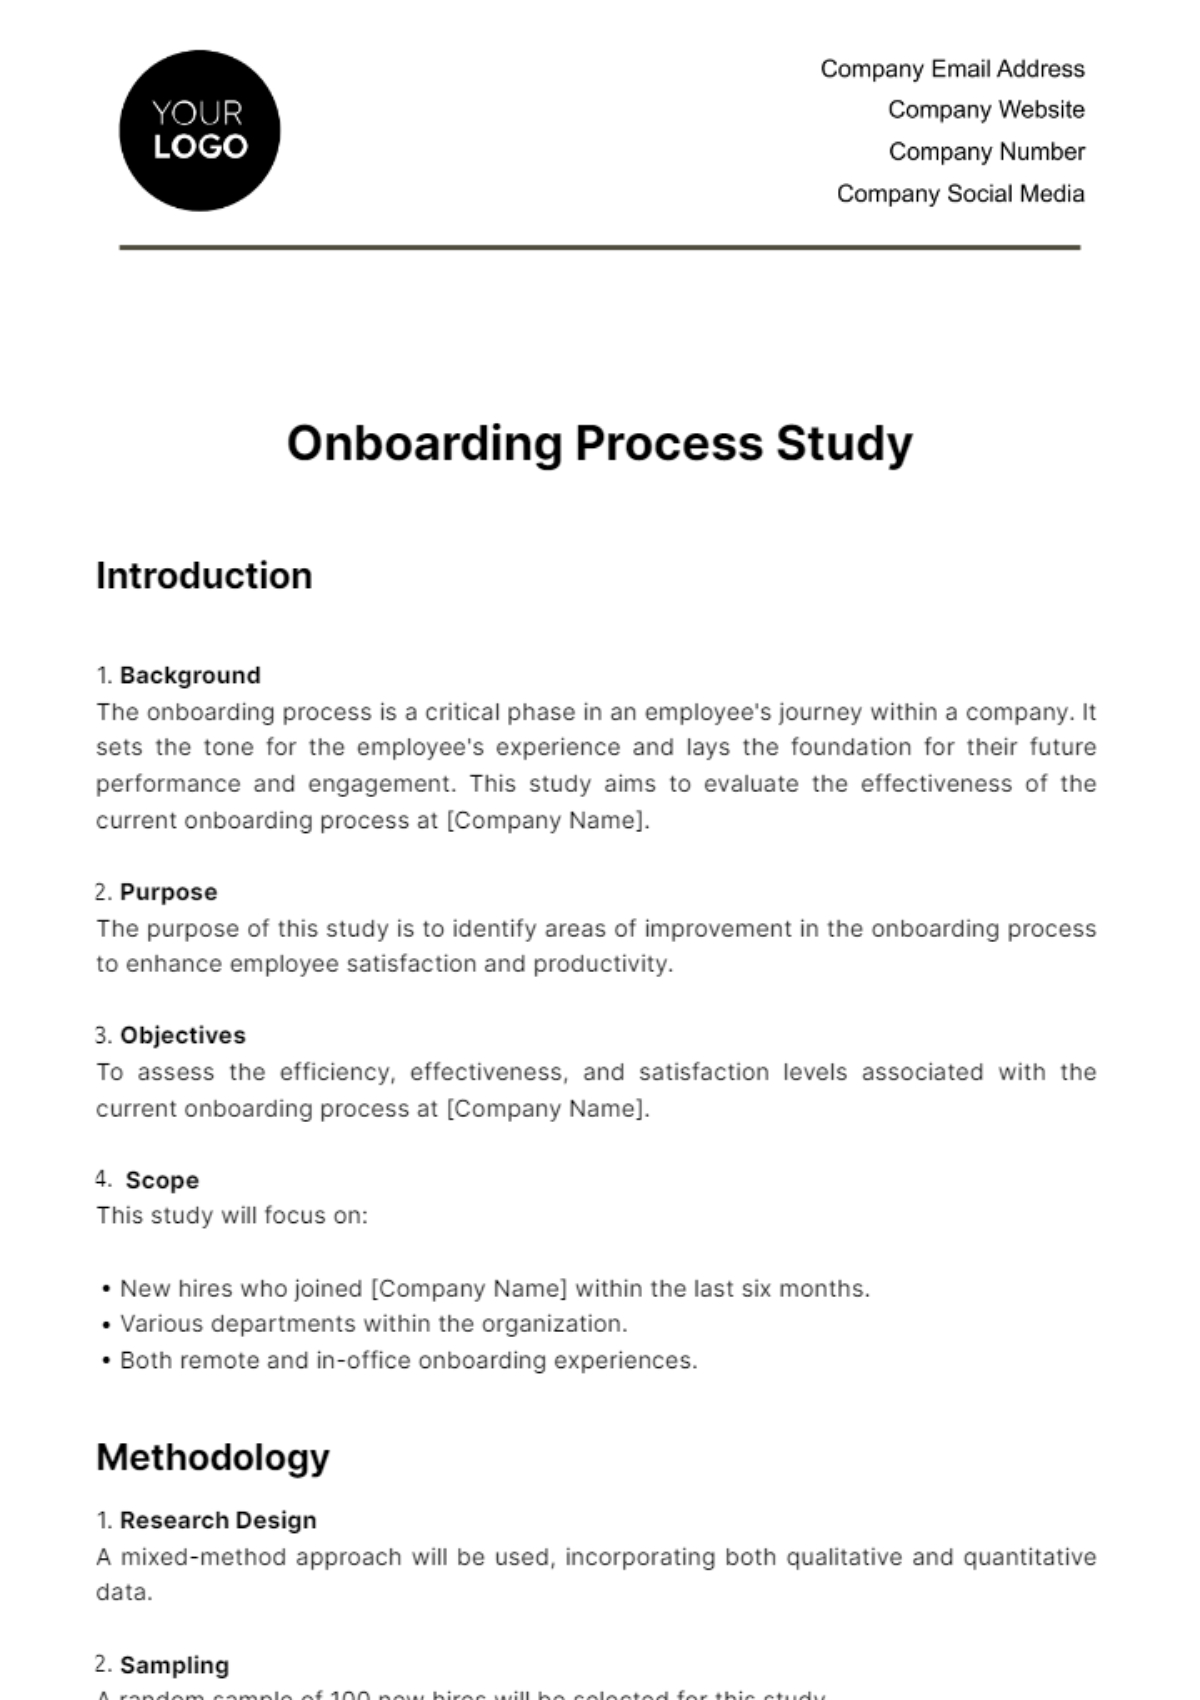 Free Onboarding Process Study HR Template